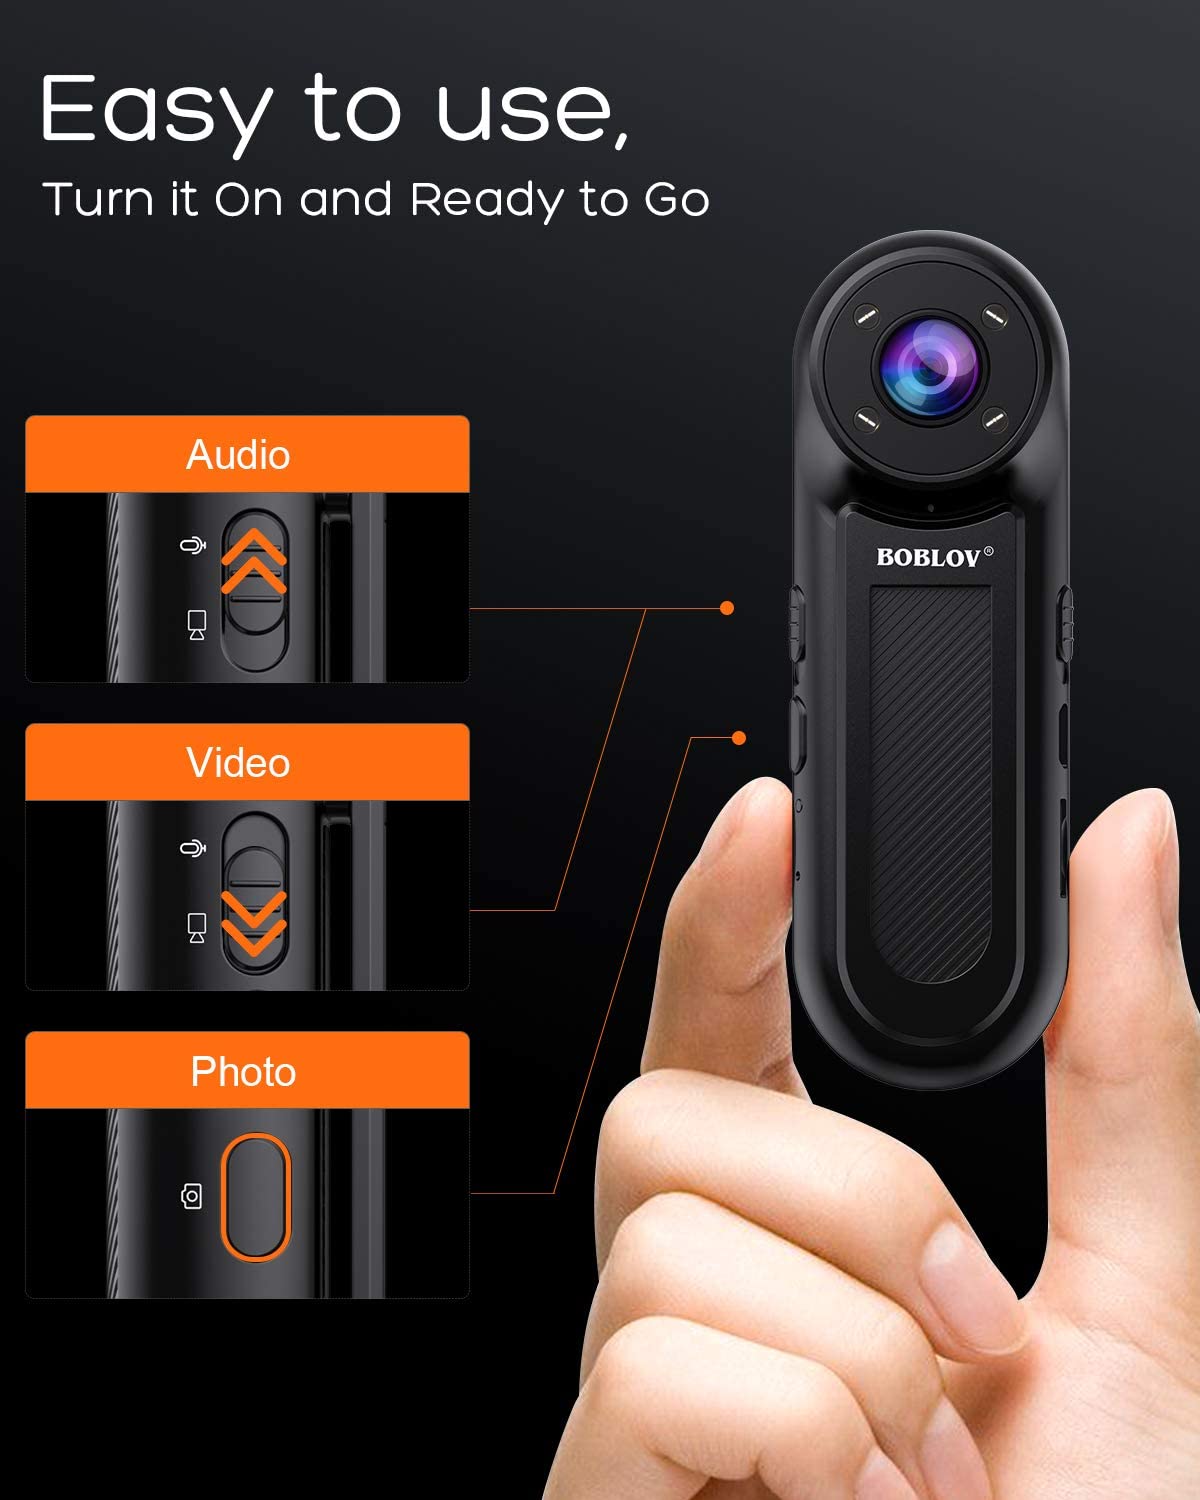 Boblov W2 small body camera with 1080P night vision and high-end Sony IMX307 sensor7